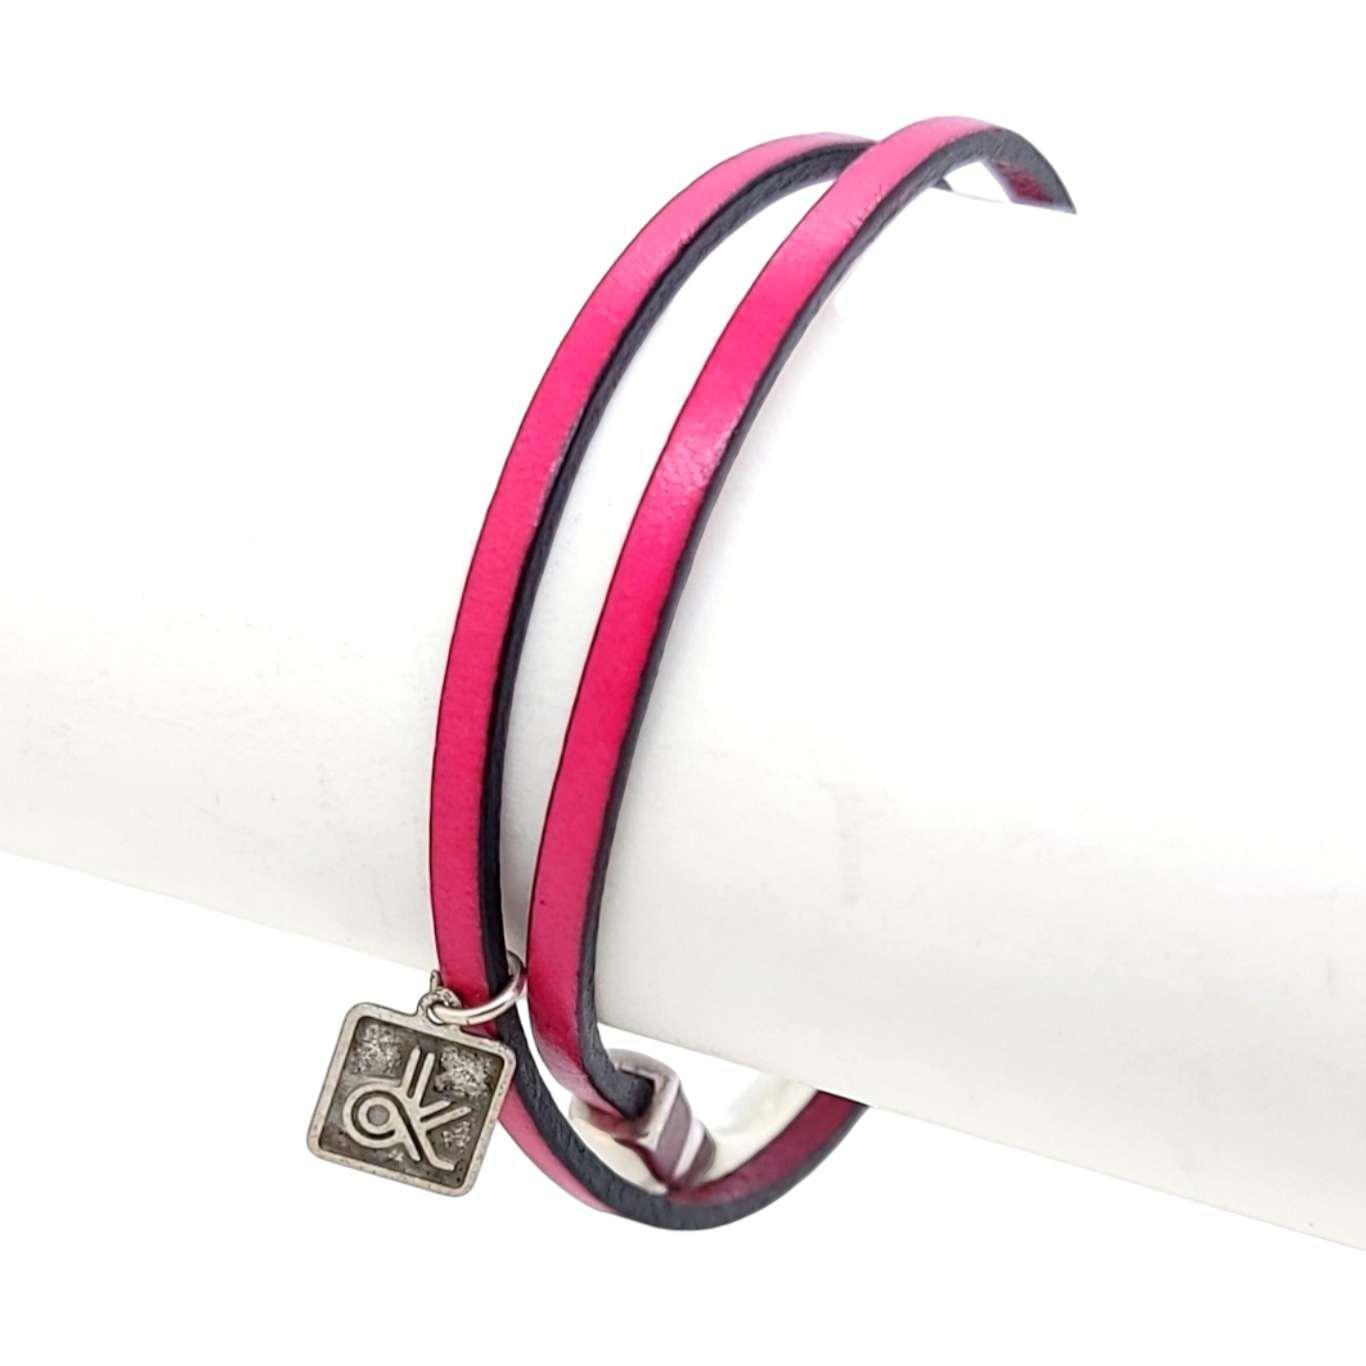 Bracelet - Skinny Breakaway in Hot Pink Leather with Silver (7in) by Diana Kauffman Designs